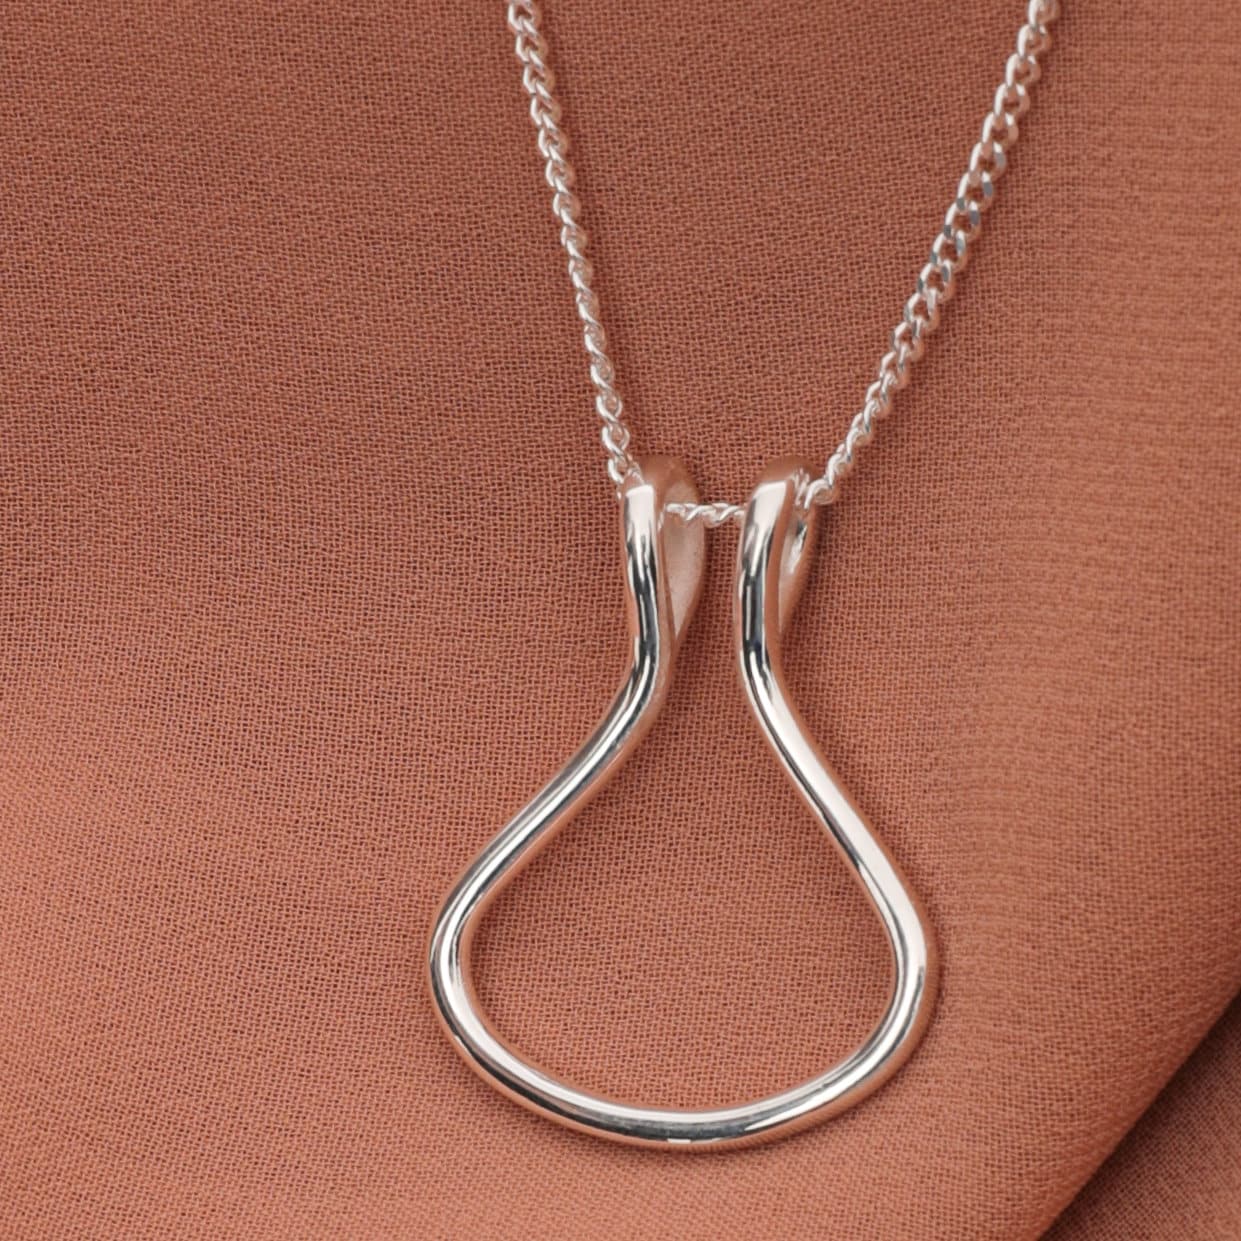 1piece Fashion Necklace Geometric Simple Ring Holder Ring Pendant Necklace  For Men Women Party Jewelry Neck Chain 45cm Long - Necklace - AliExpress